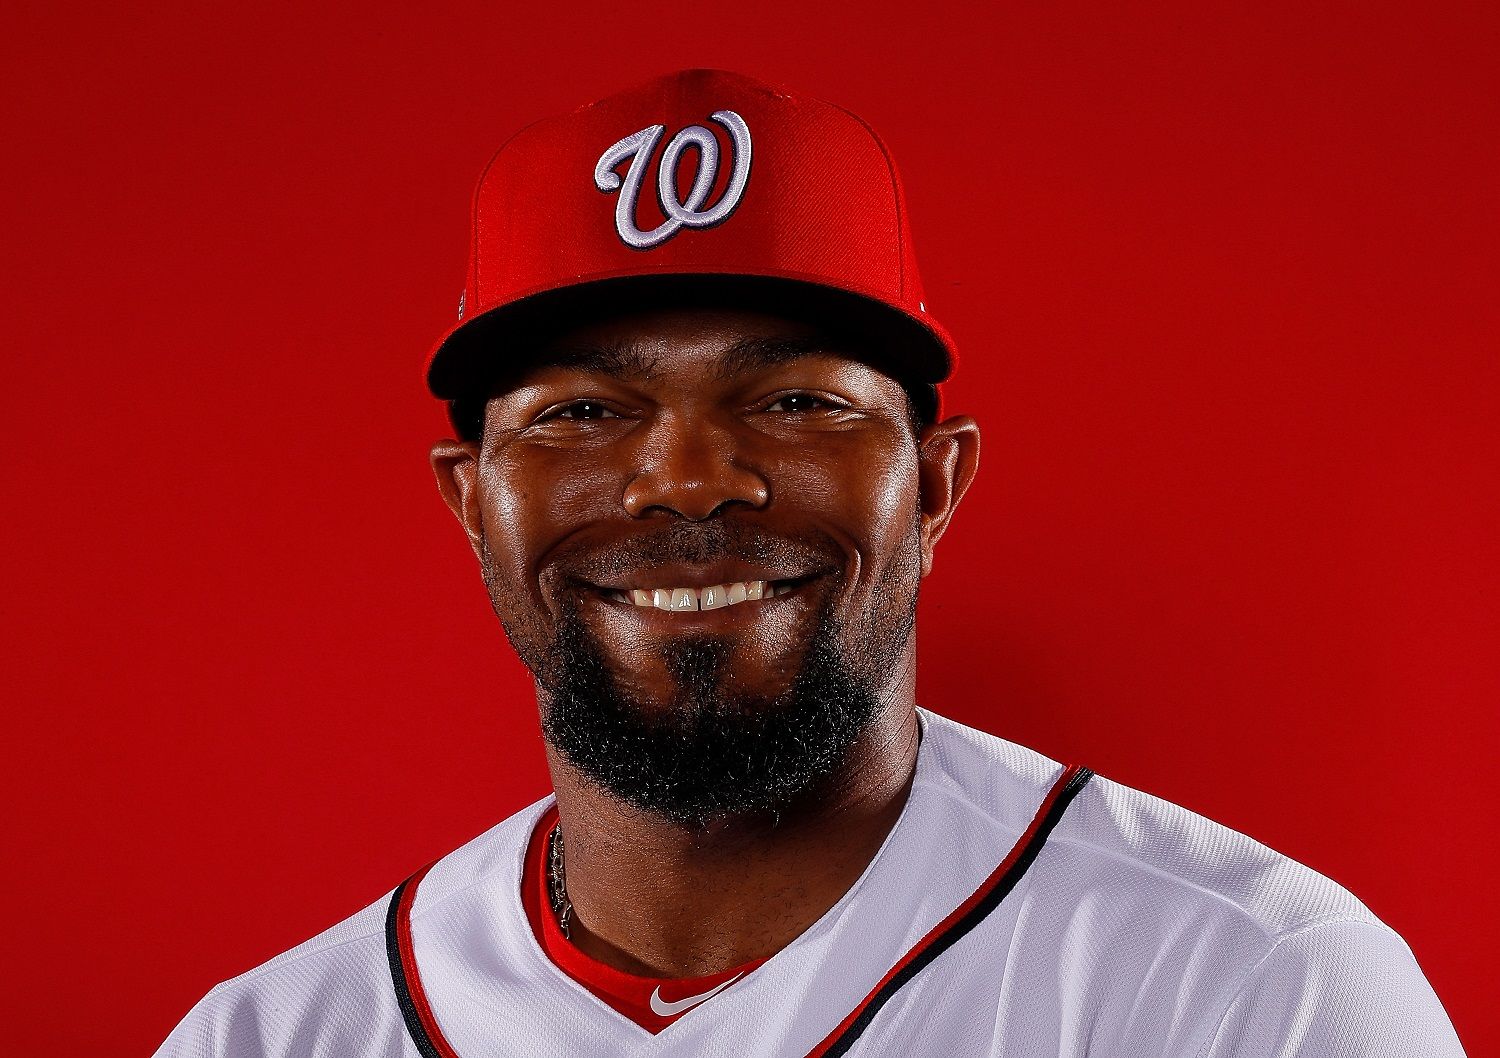 WEST PALM BEACH, FL - FEBRUARY 22:  Howie Kendrick #12 of the Washington Nationals poses for a photo during photo days at The Ballpark of the Palm Beaches on February 22, 2018 in West Palm Beach, Florida.  (Photo by Kevin C. Cox/Getty Images)